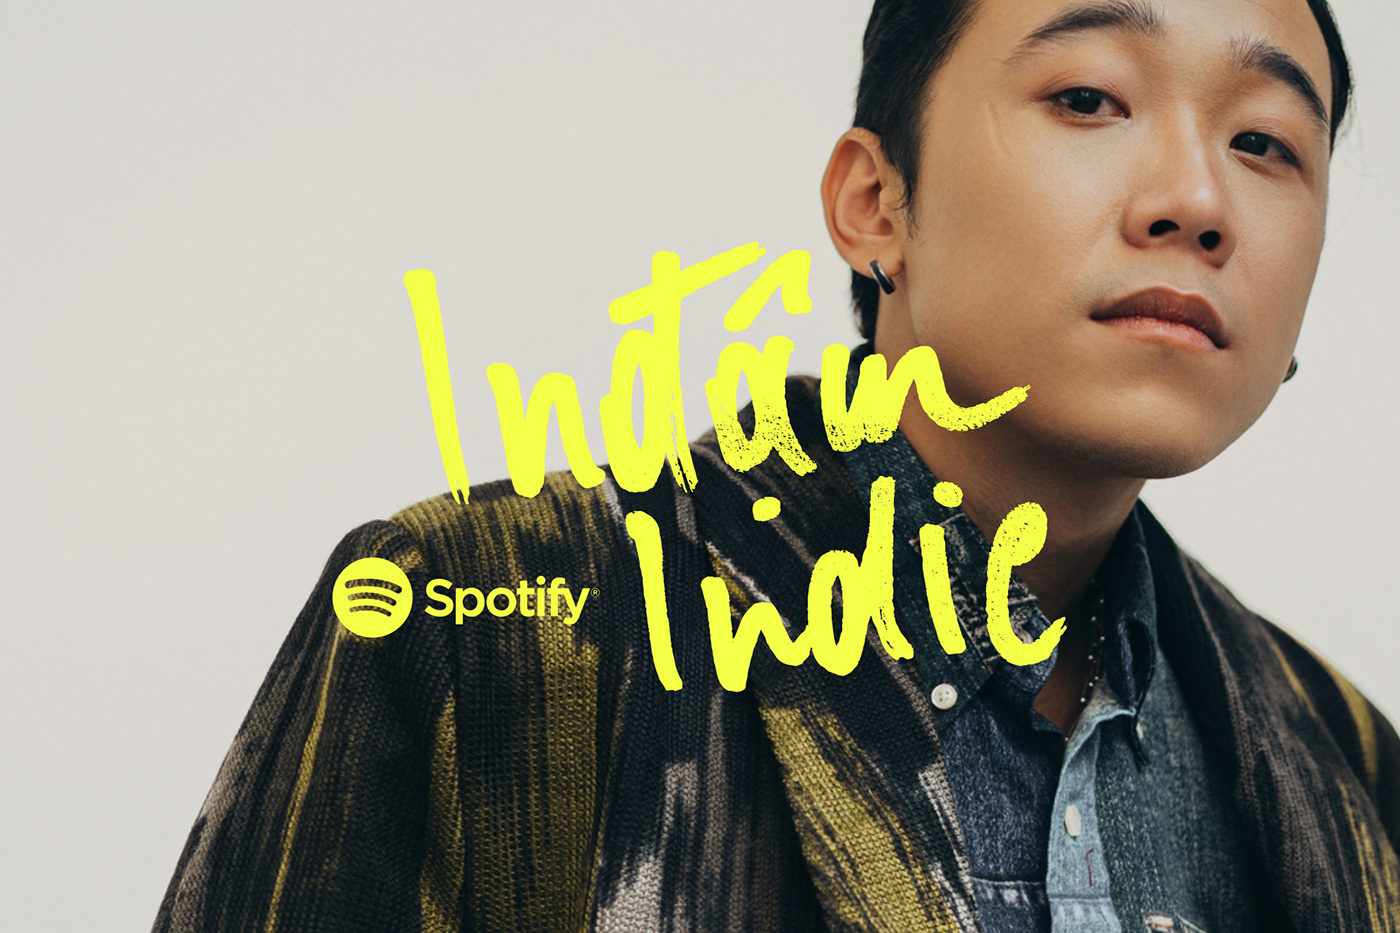 vietnam indie music spotify playlist branding  Lo-fi analog cover campaign